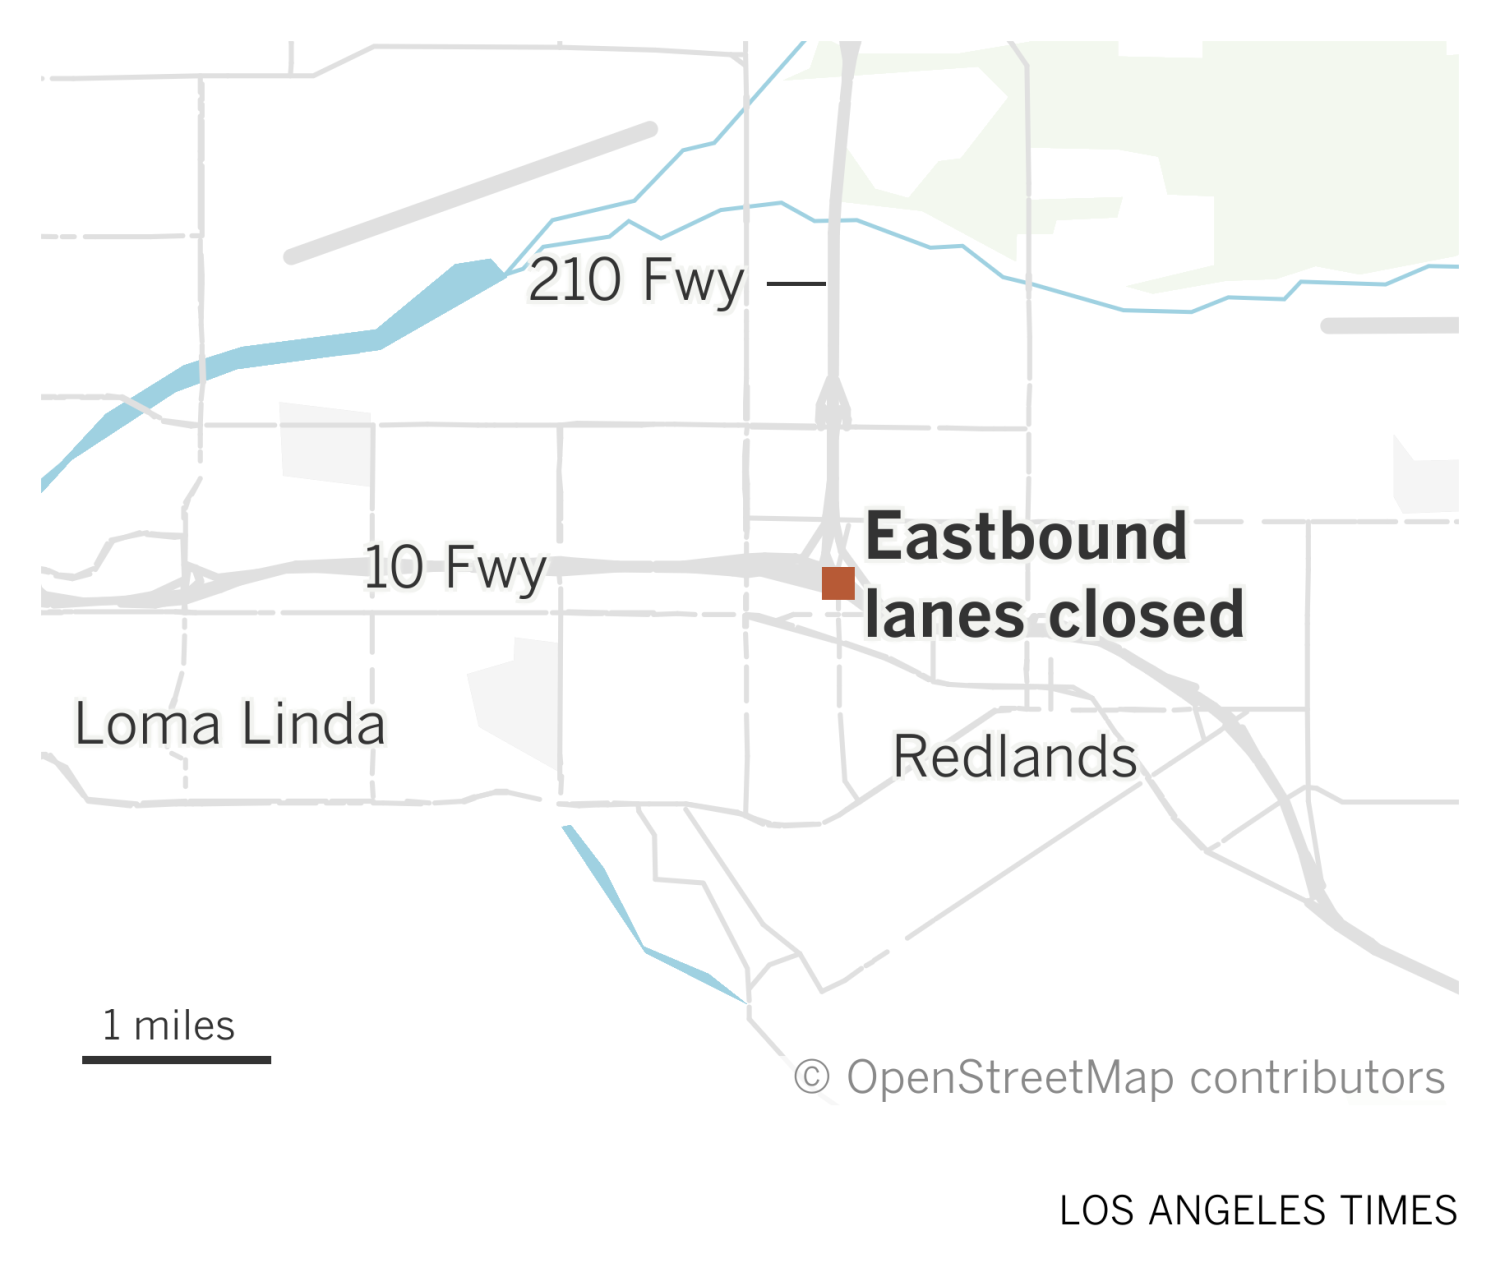 Shooting, police chase shut down eastbound 10 Freeway in Redlands